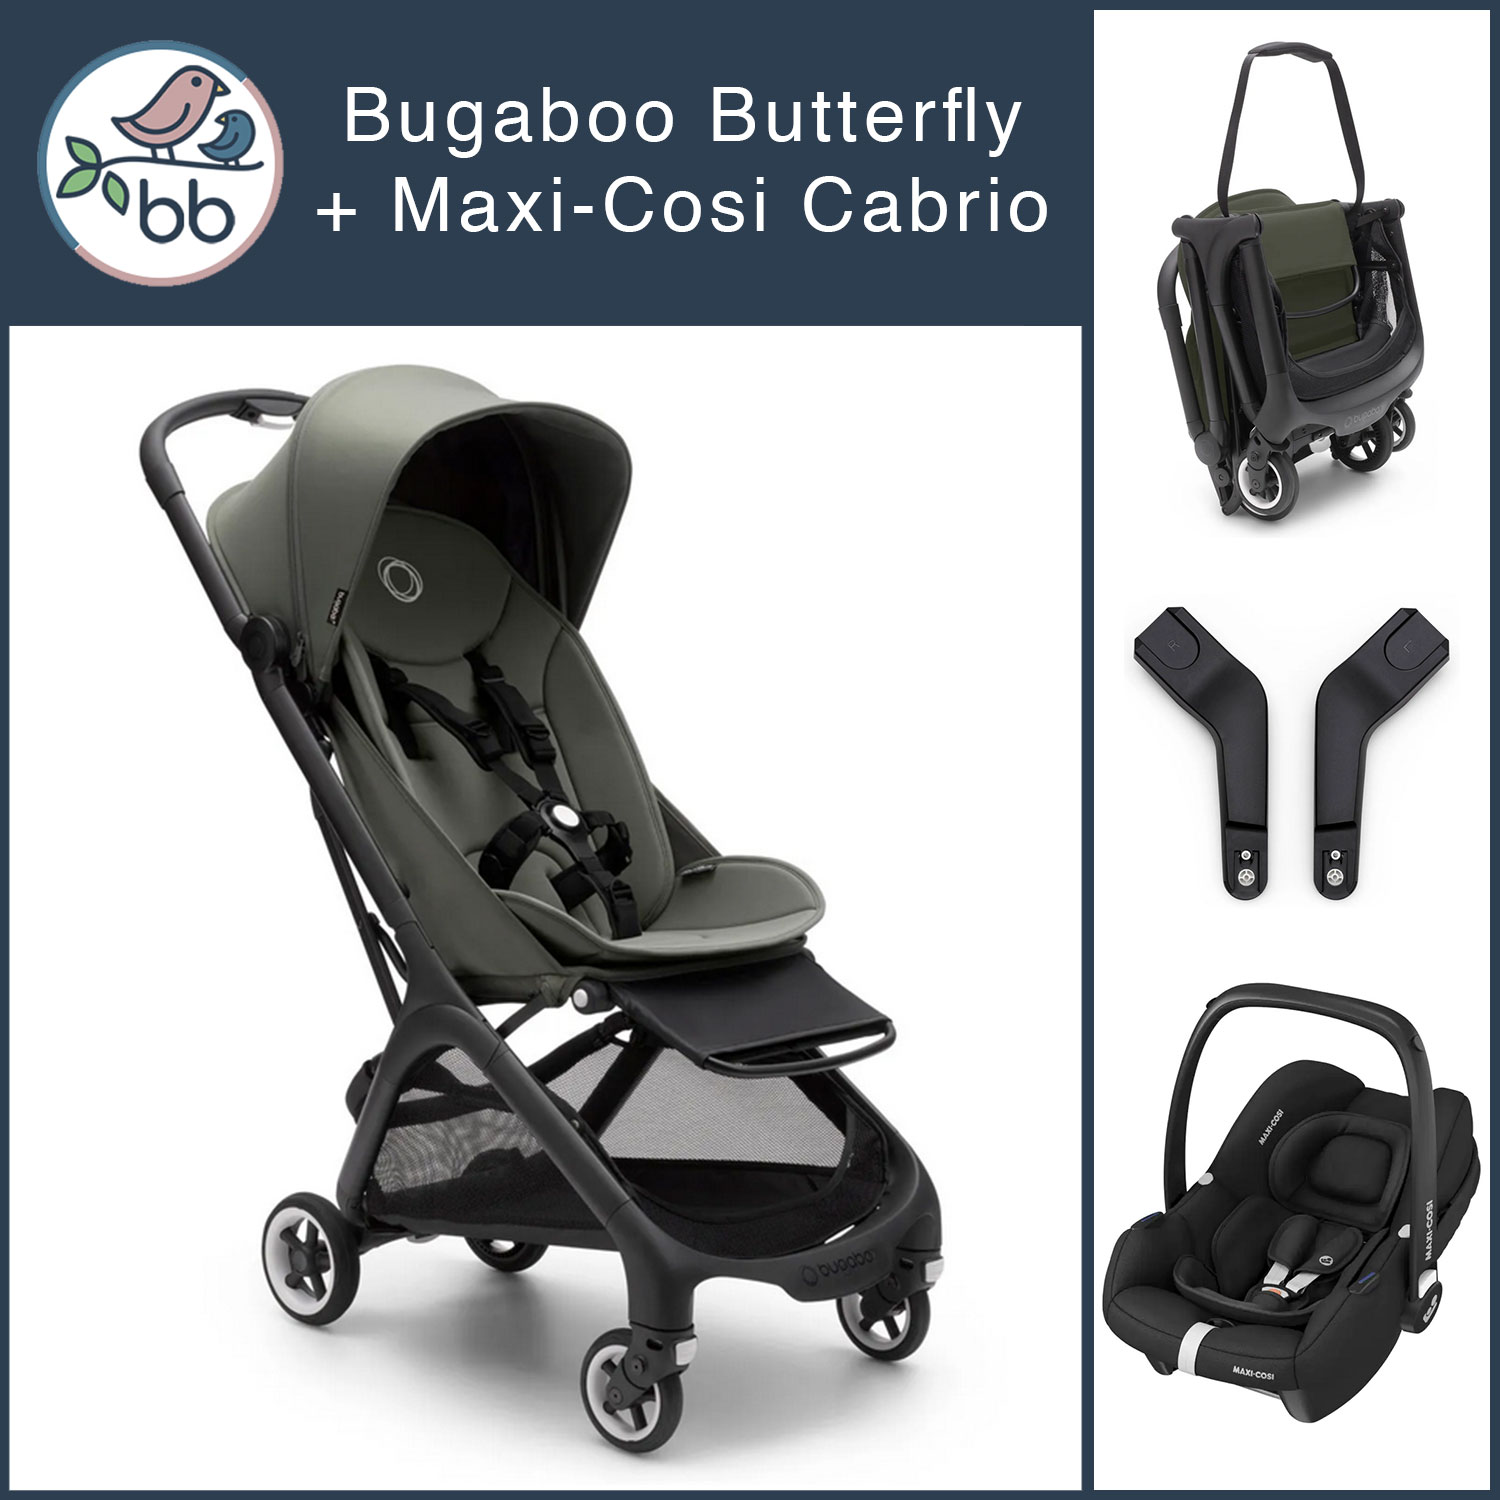 Bugaboo Butterfly Compact Stroller & Accessories Bundle - Stormy Blue